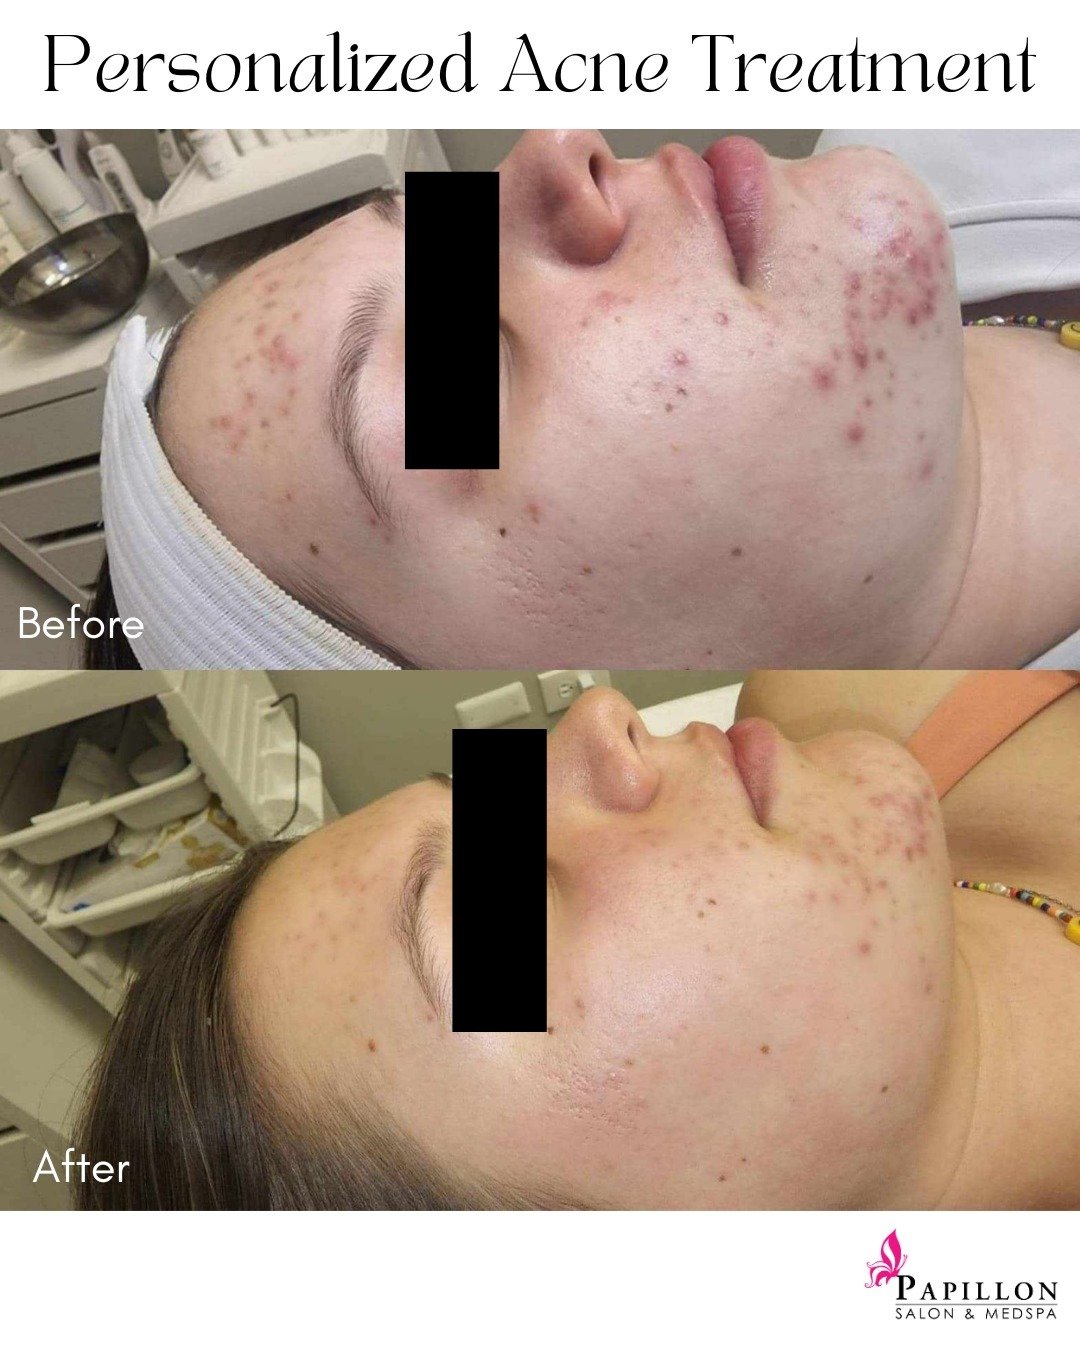 As a teenager or adult, dealing with acne can be frustrating and overwhelming. But here's the thing, there is no one size fits all when it comes to treating acne. Everyone's skin is different and requires personalized treatment. That's why at Papillo